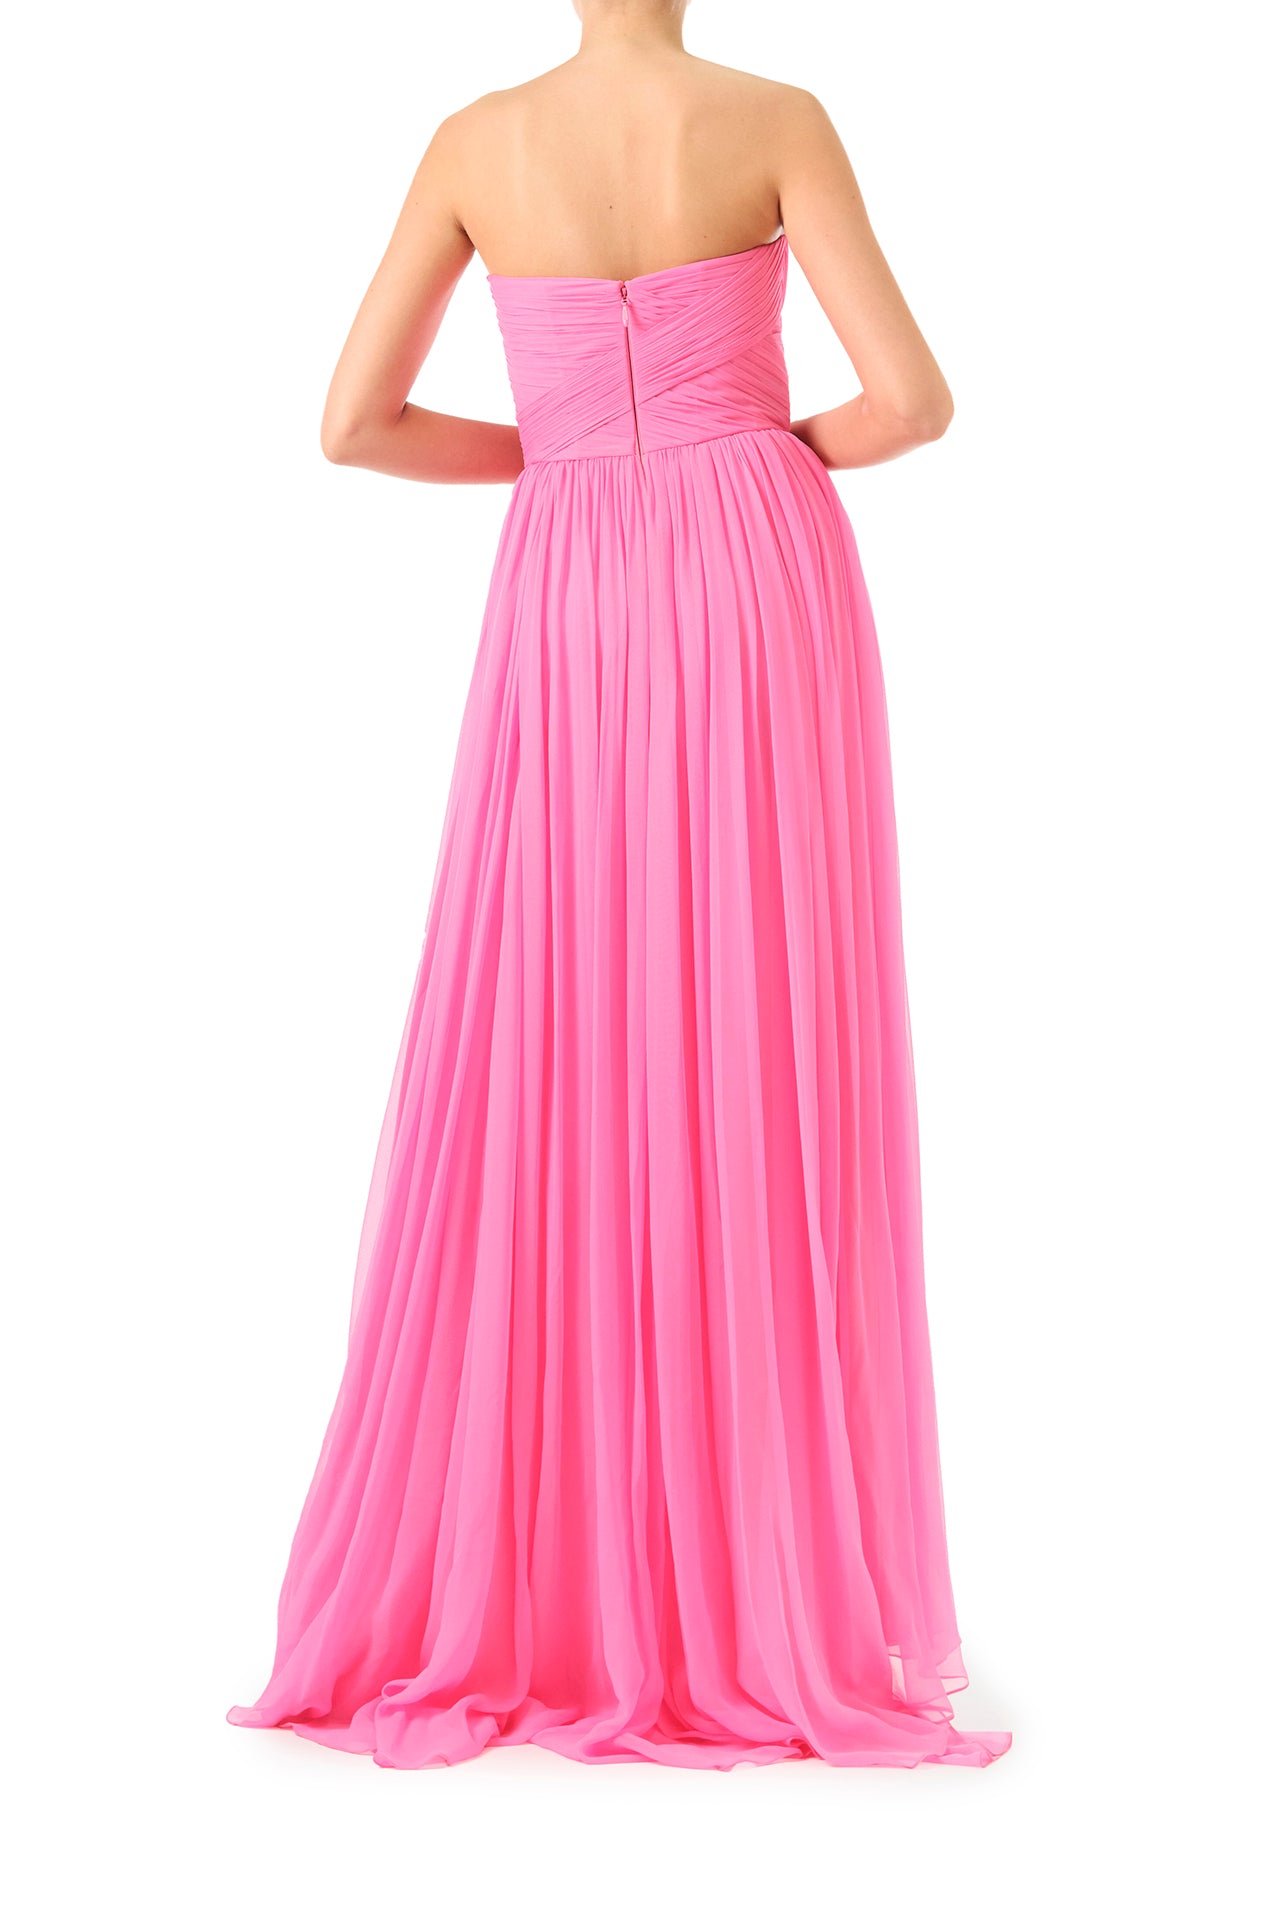 Monique Lhuillier Fall 2024 strapless pink chiffon gown with sweetheart neckline - back.